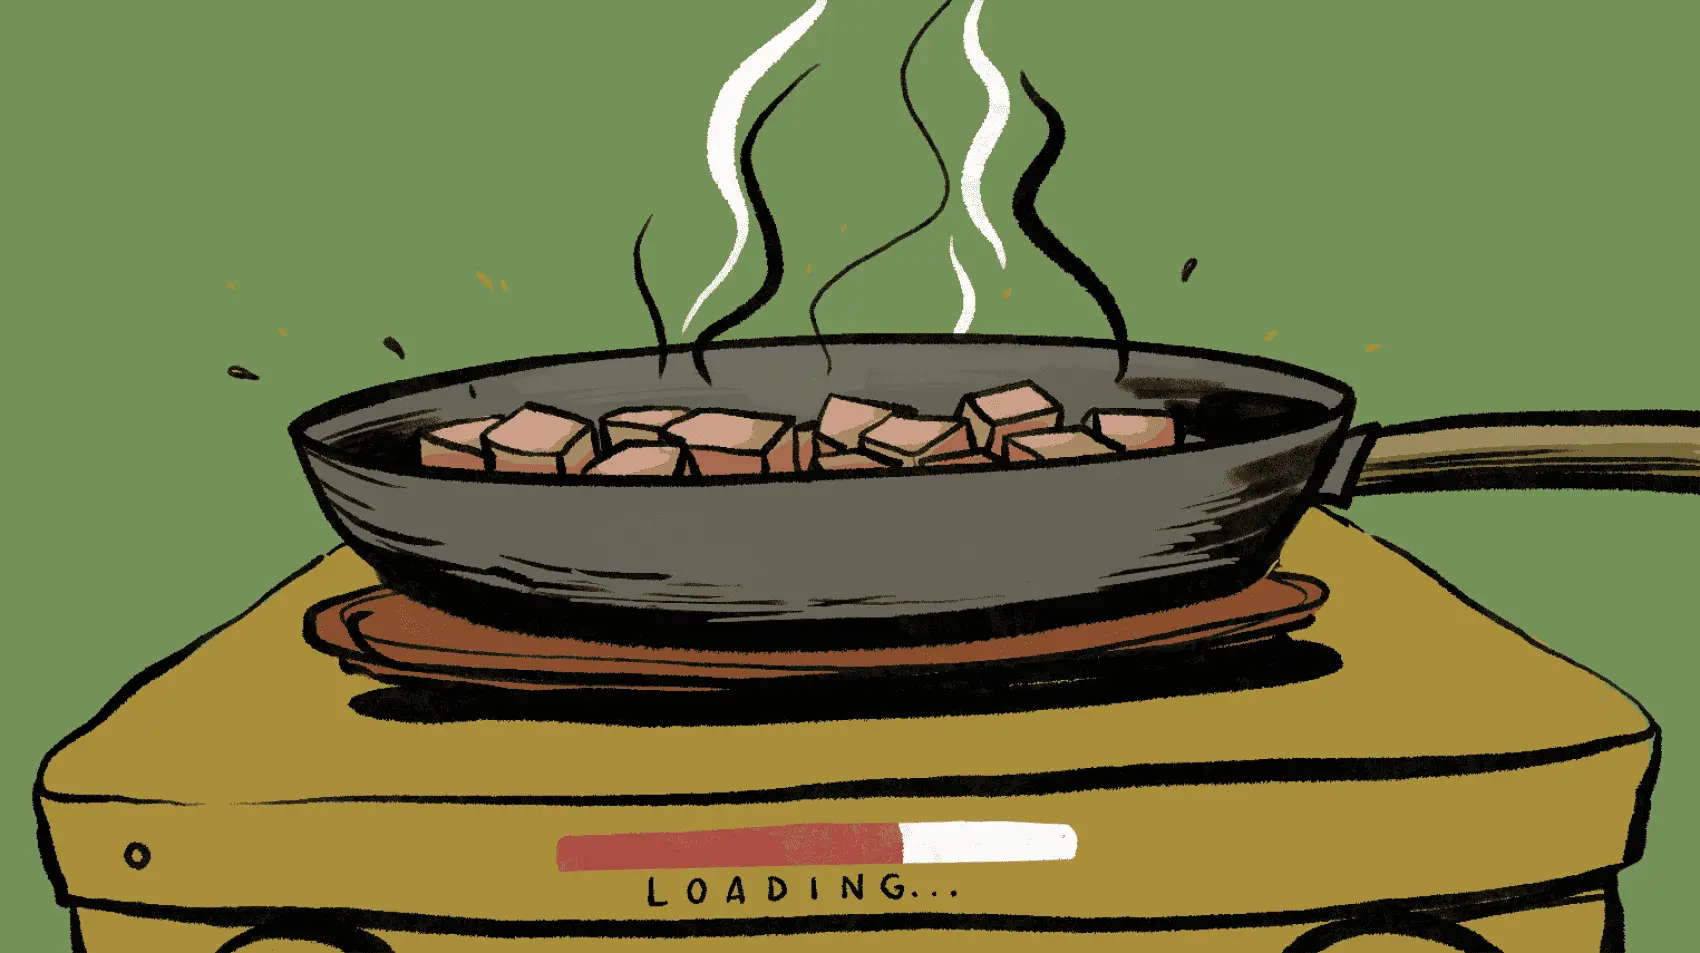 We are shown an image with a background of pastel, green color. Encompassing most of the image's center is a seemingly electric stove, on top of which chunks of brown cube ingredients are cooked in a grey frying pan. On the body of the stove, right below the cooking frying pan, is a label and a progress bar indicating the term LOADING.